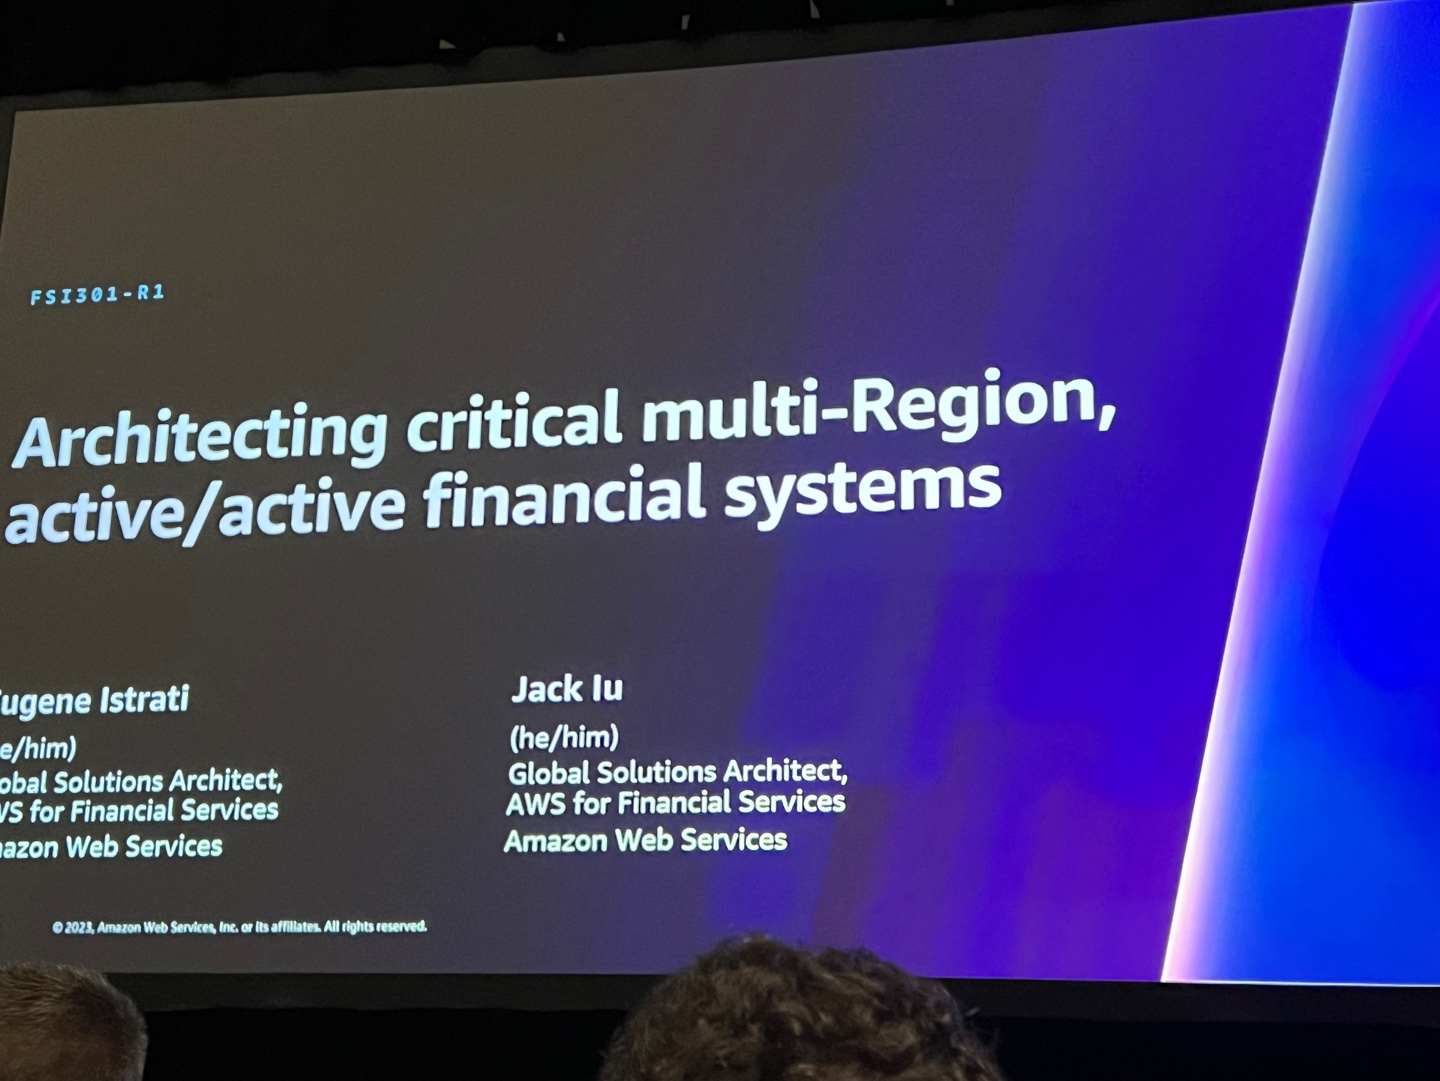 Architecting critical multi-Region, active/active financial systems